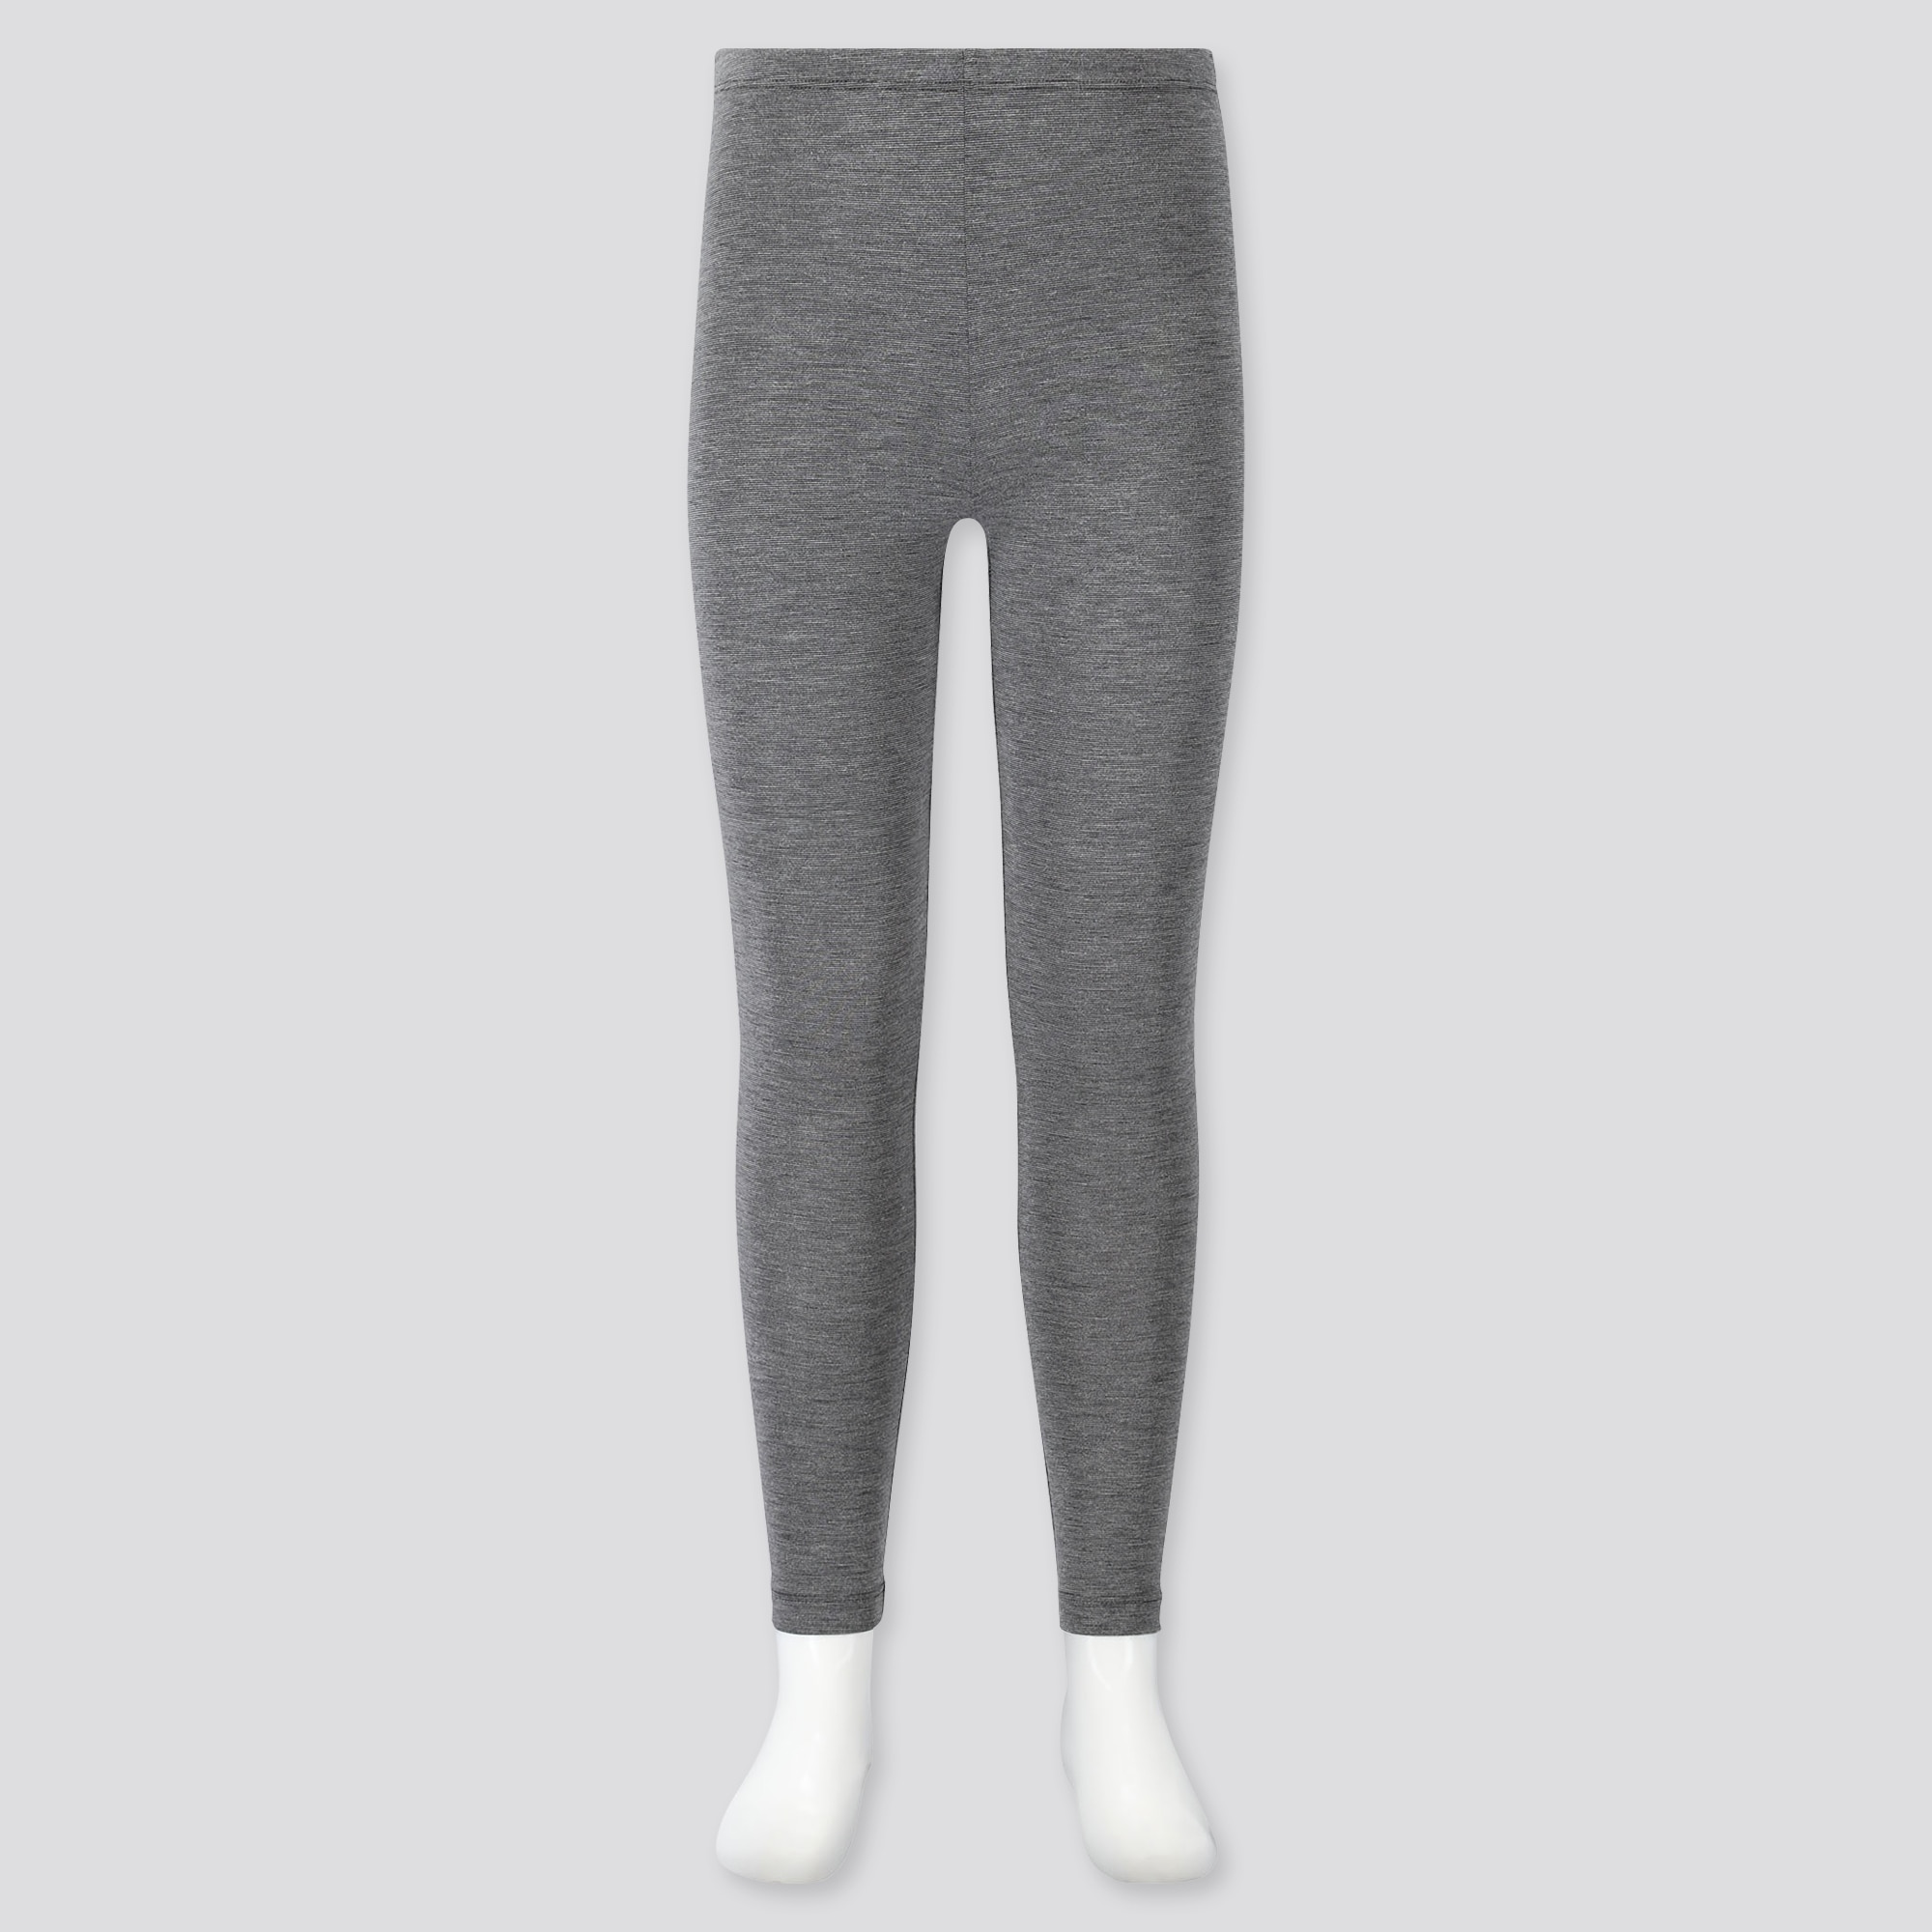 Uniqlo Thermal Leggings Reviewers